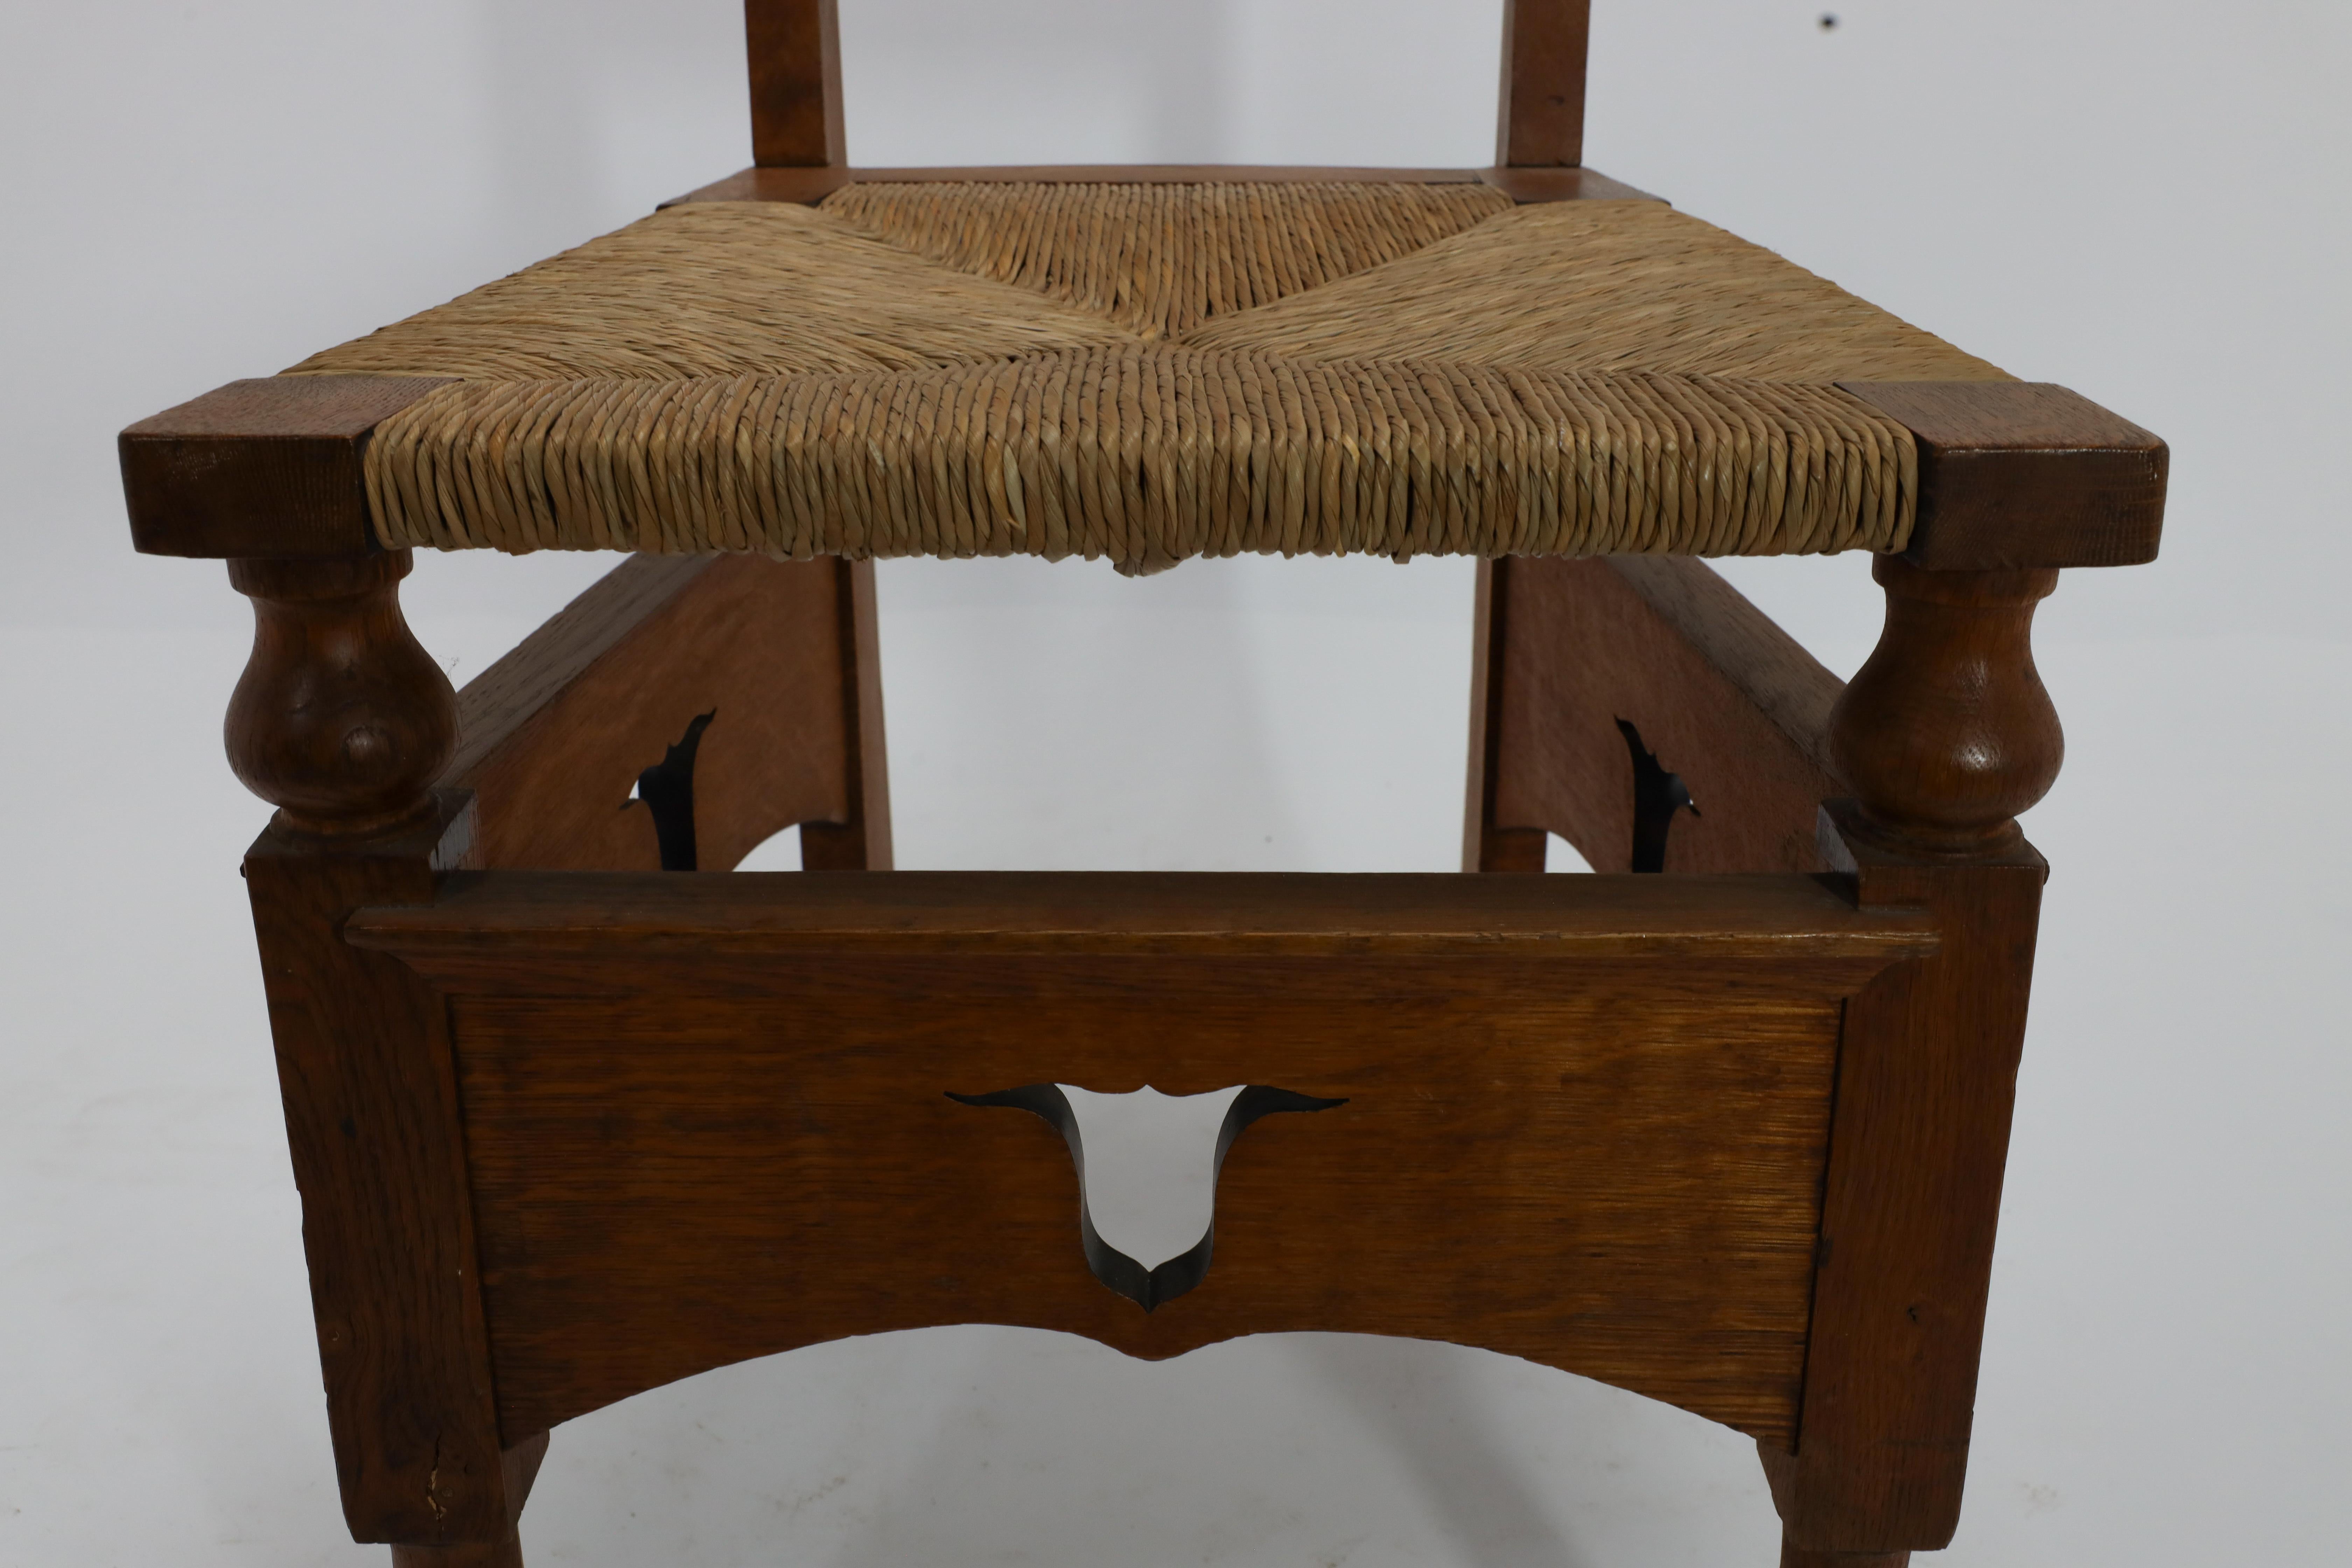 M H Baillie Scott attri An Arts & Crafts Oak Chair With Stylised Floral Cut-Outs For Sale 2